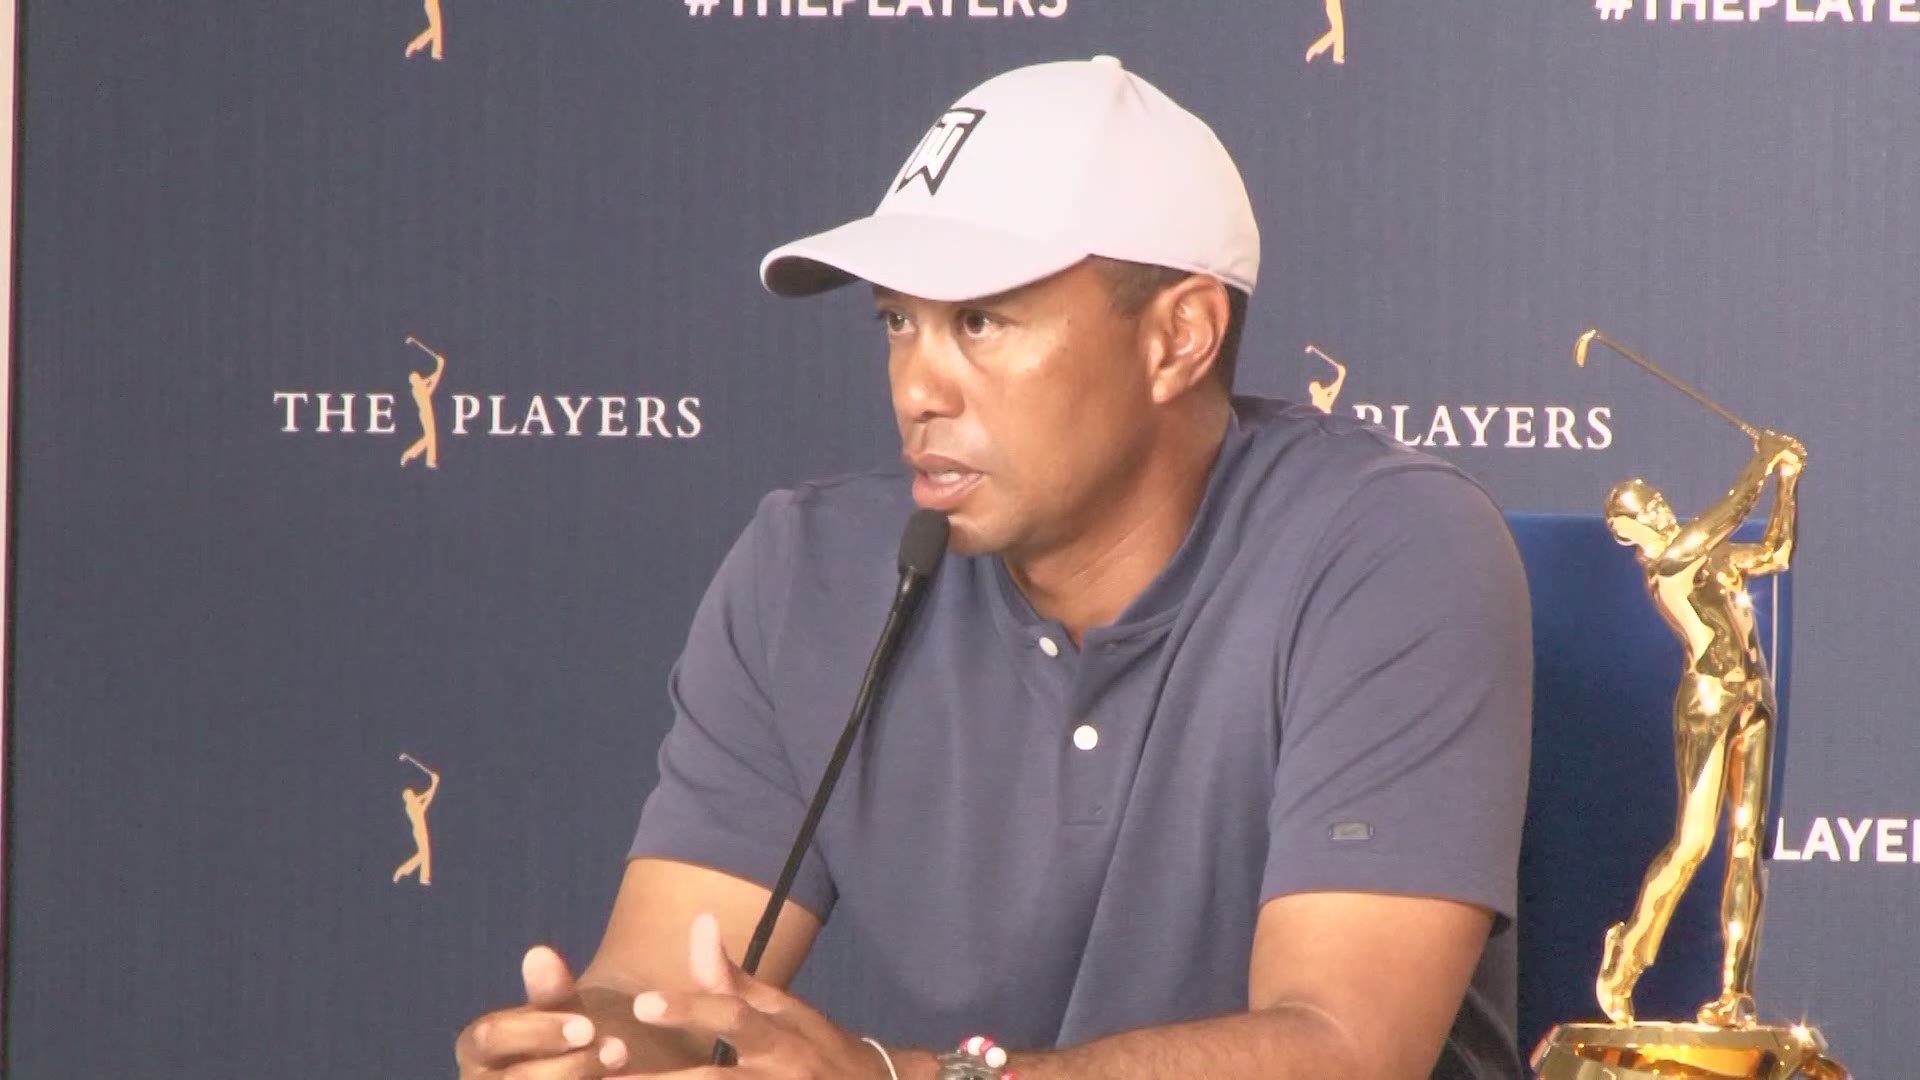 During a news conference in Ponte Vedra Beach, Tiger Woods discussed how his practice regiment has changed following recent health issues and how he tracks his success.